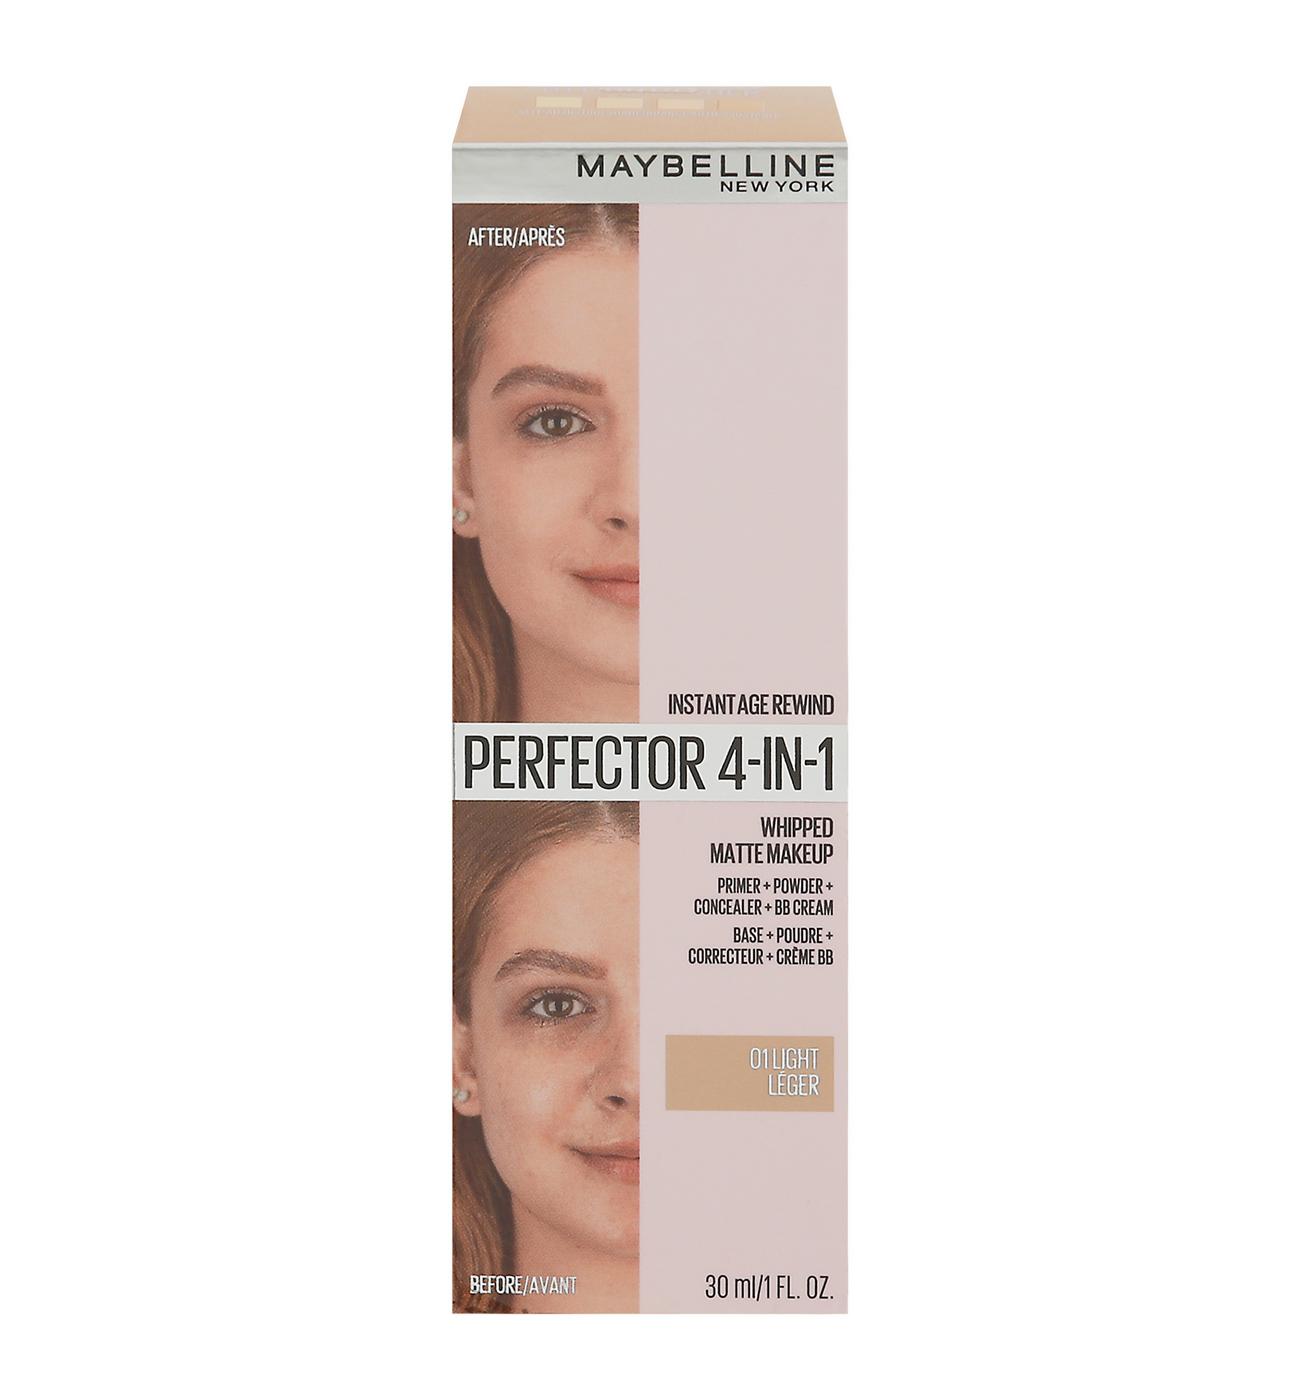 Perfector Maybelline Instant Makeup - - Light H-E-B Age Shop at Foundation 4-In-1 01 Matte Rewind